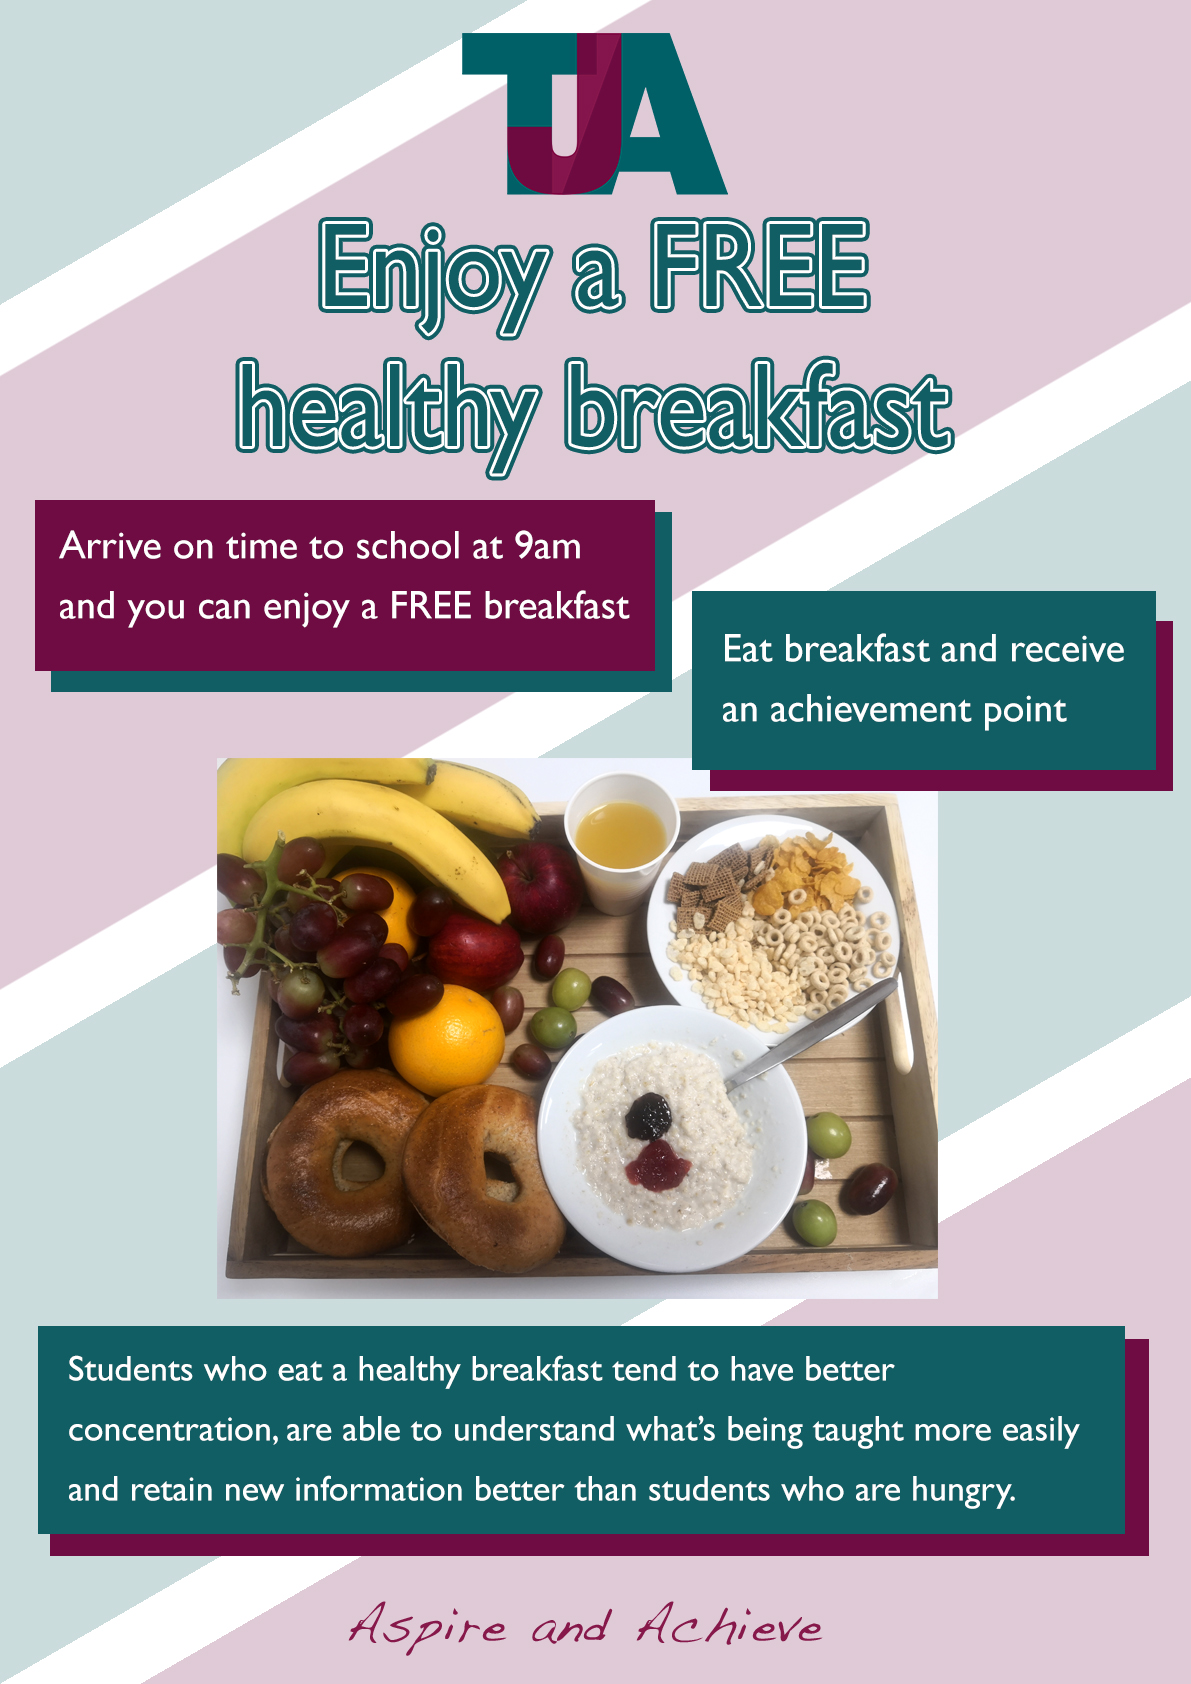 A poster advertising the free health breakfast offered to students at The Jubilee Academy